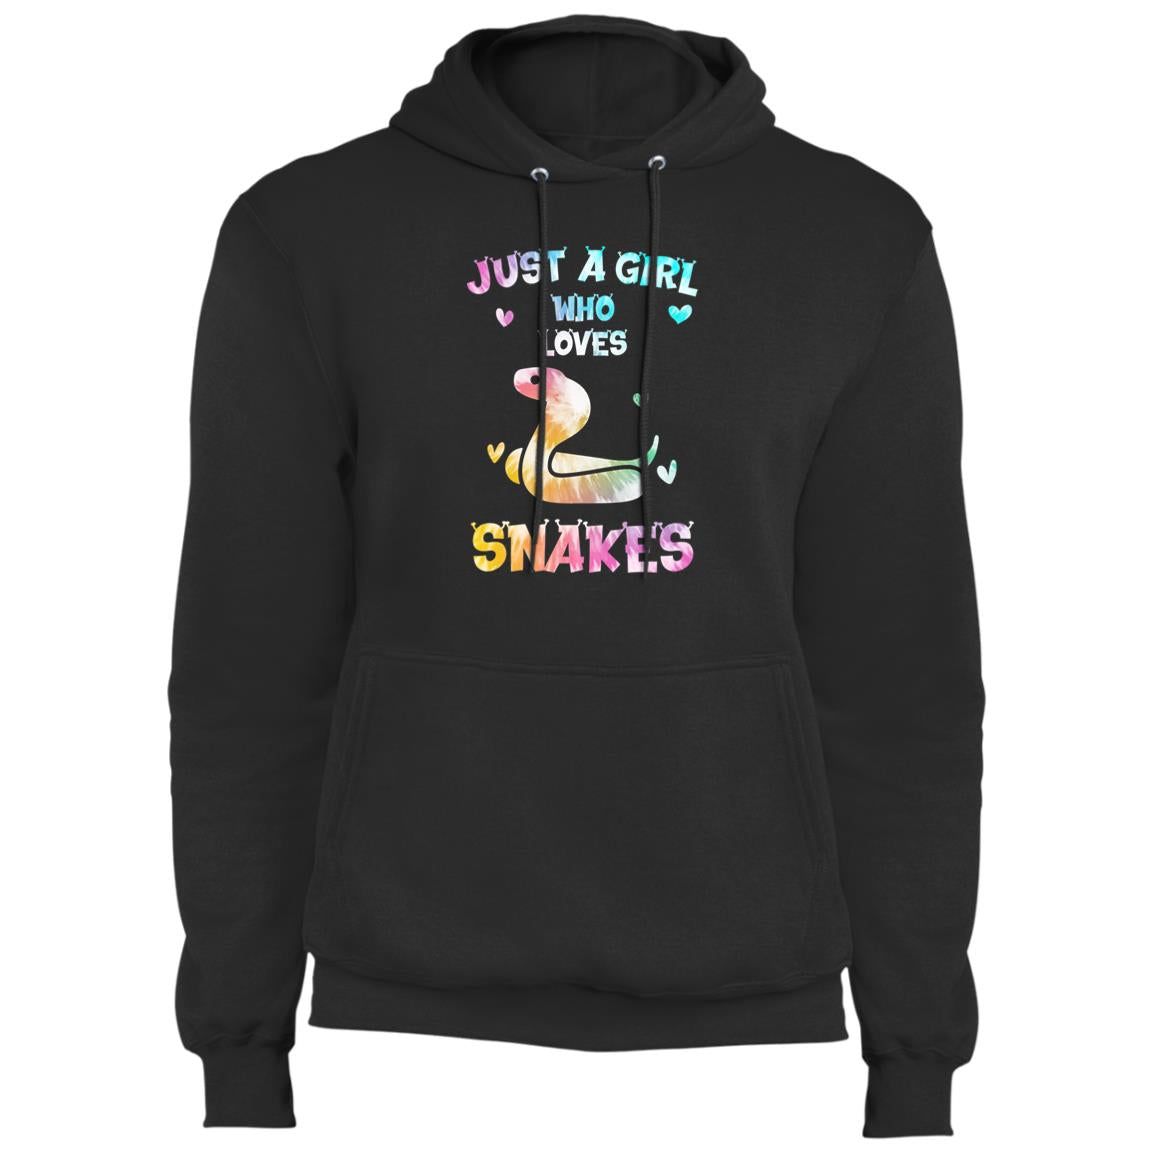 Just A Girl Who Loves Snakes - Fleece Pullover Hoodie